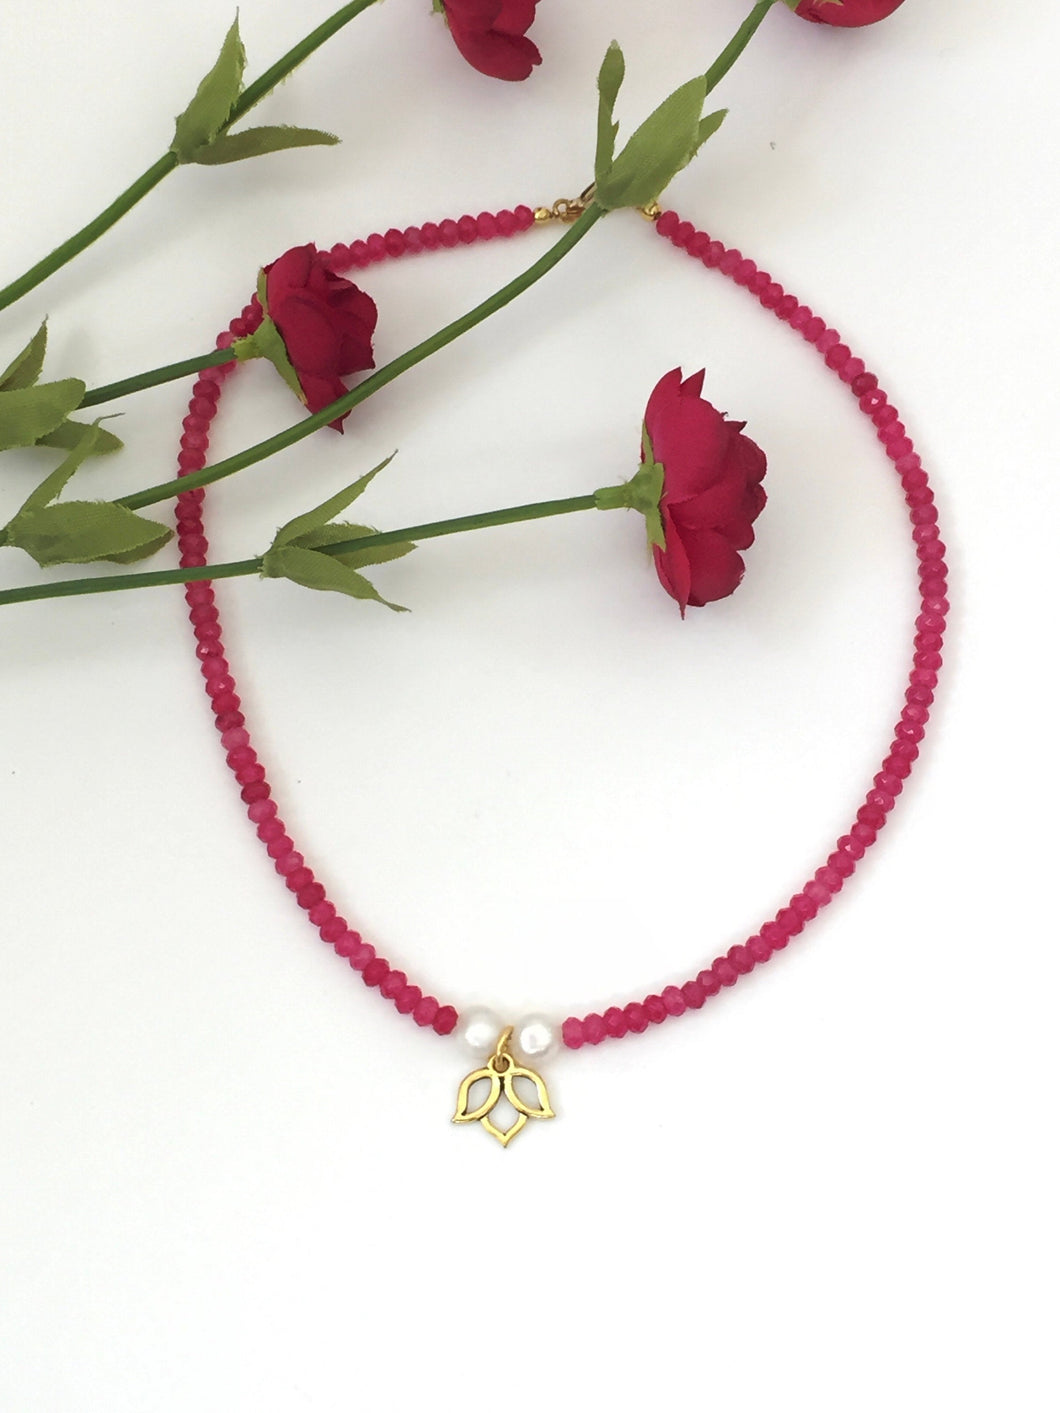 Ruby Choker Necklace With Genuine Pearls And Gold Lotus Charm